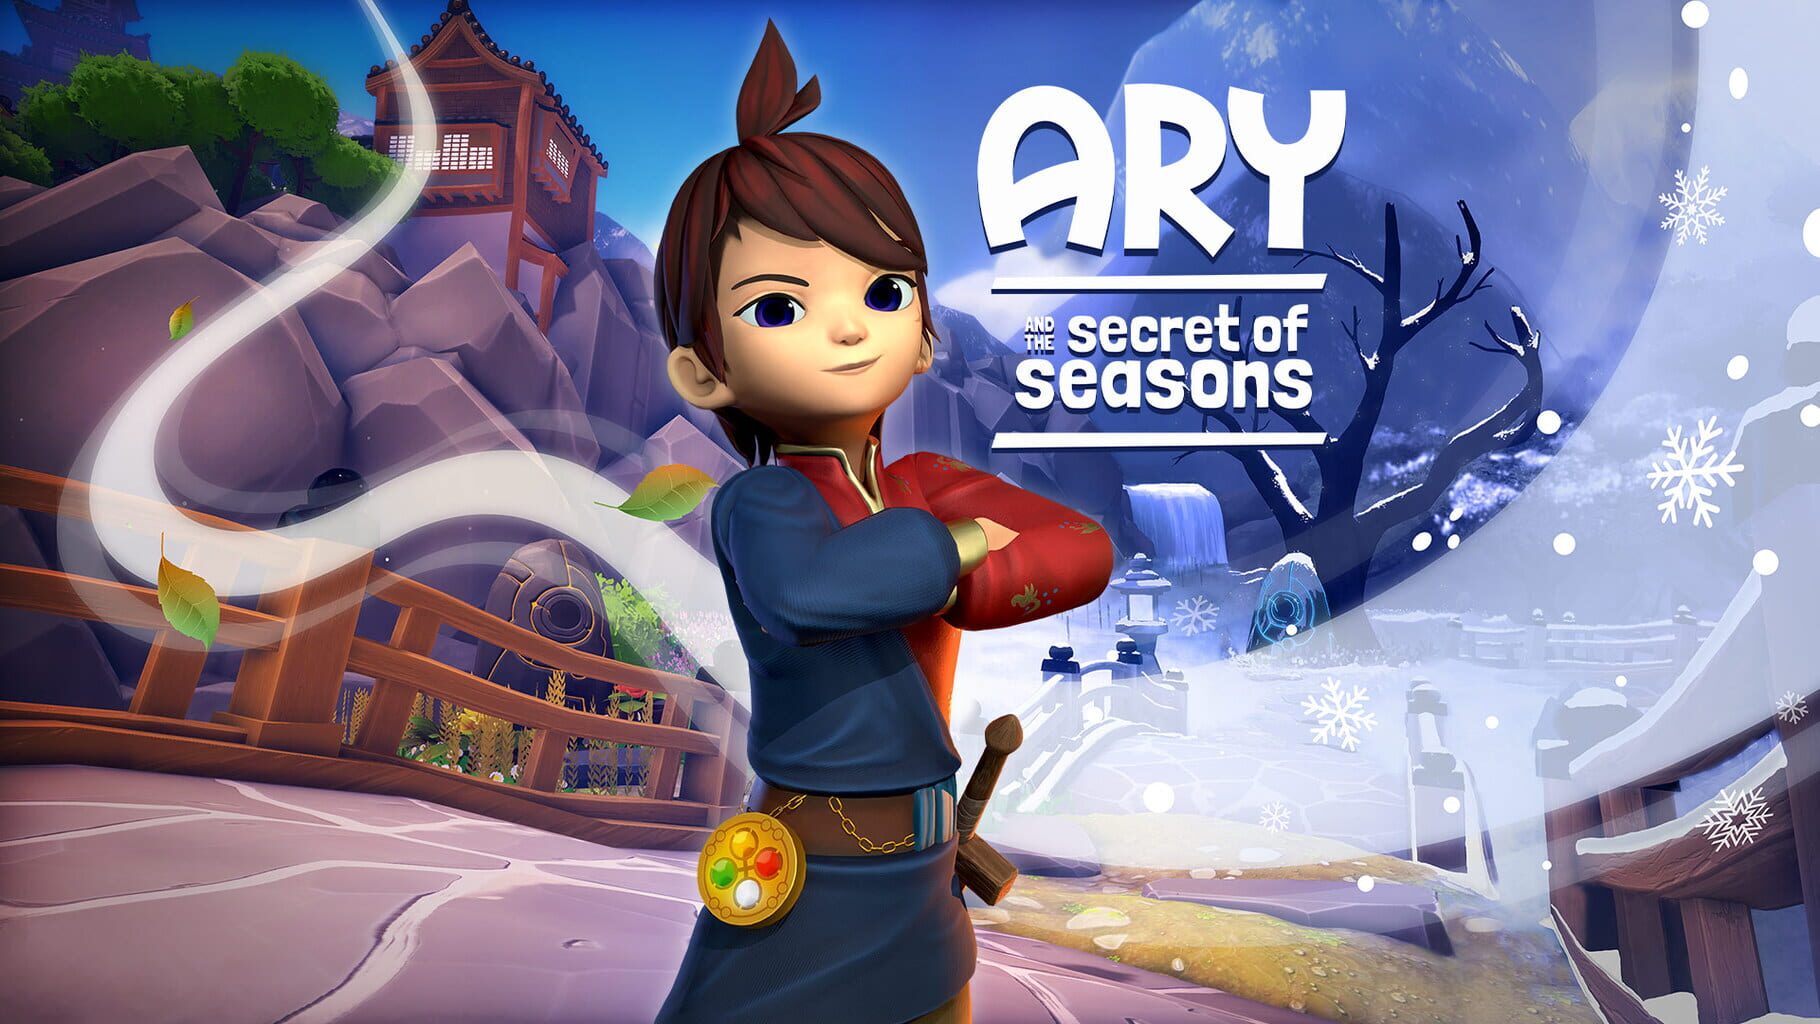 Ary and the Secret of Seasons artwork